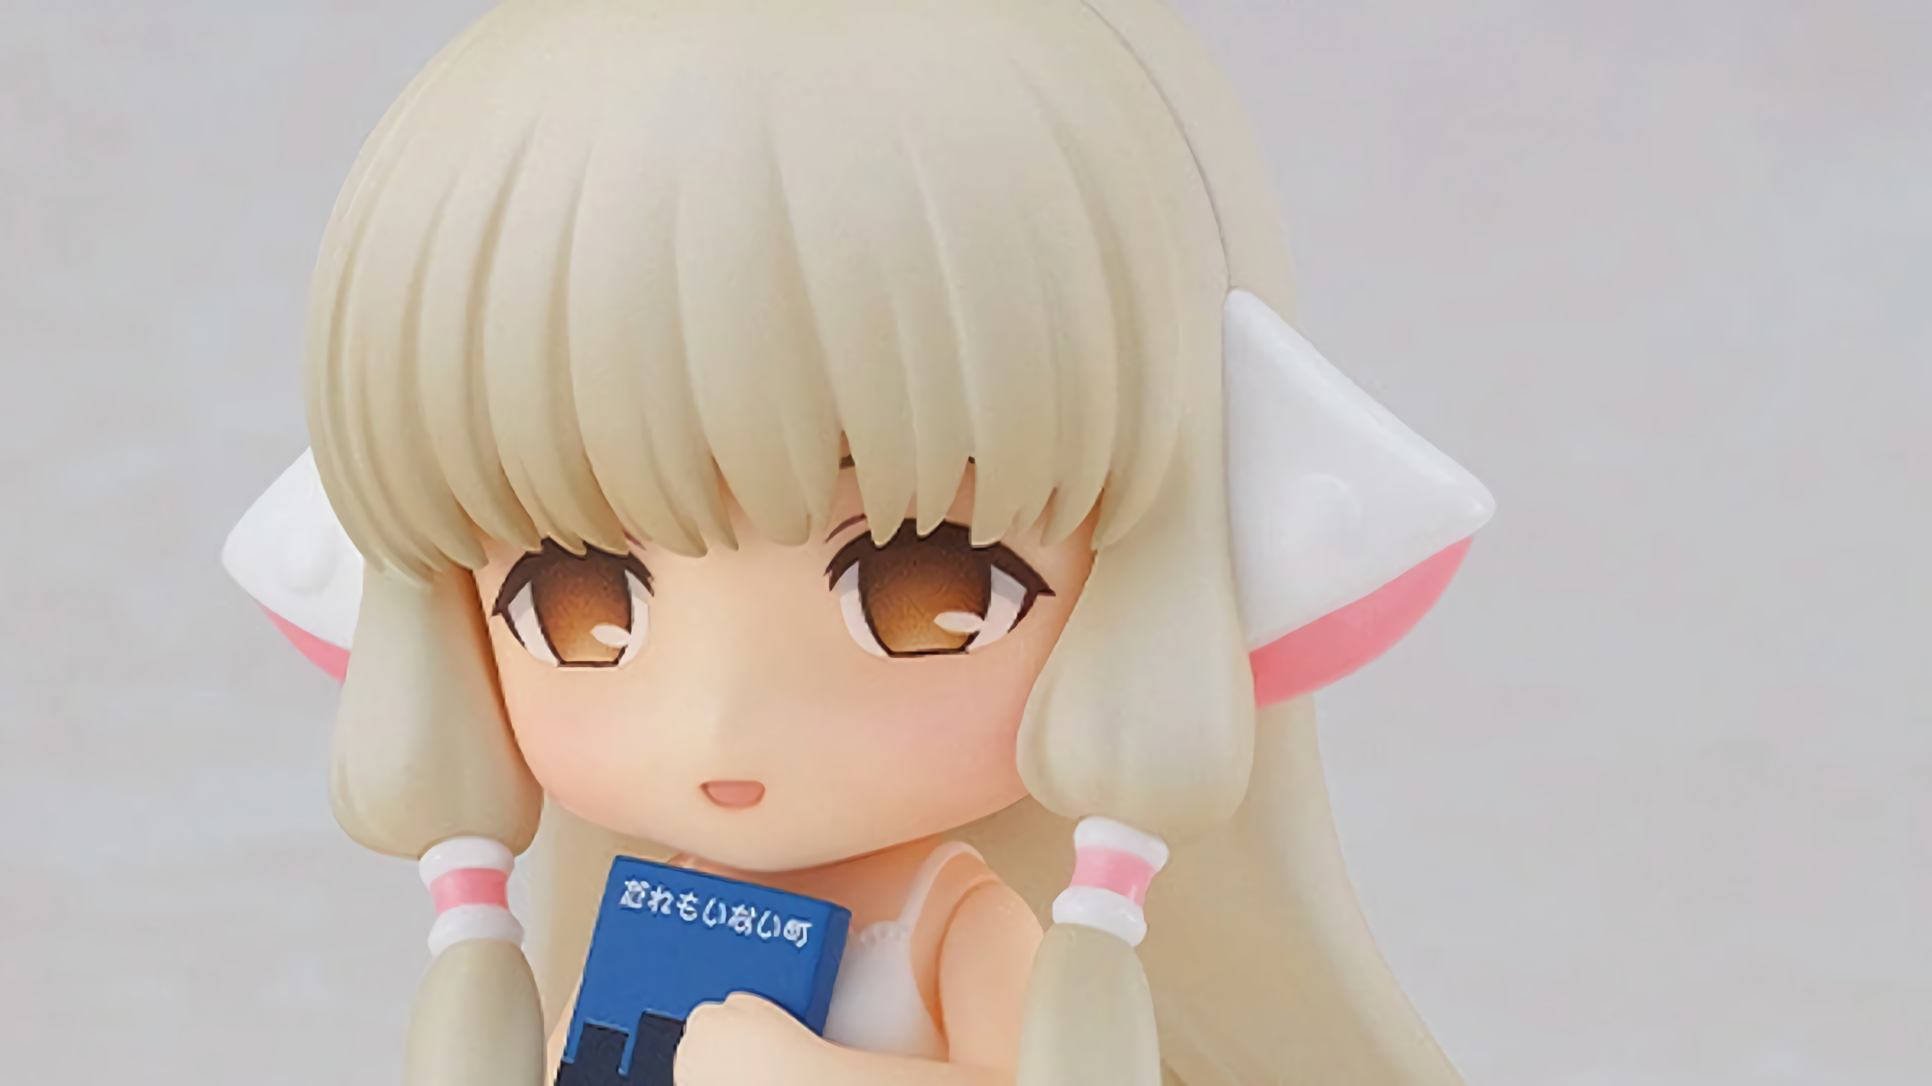 Chobits Chi Nendoroid Gives the Figure Her Book